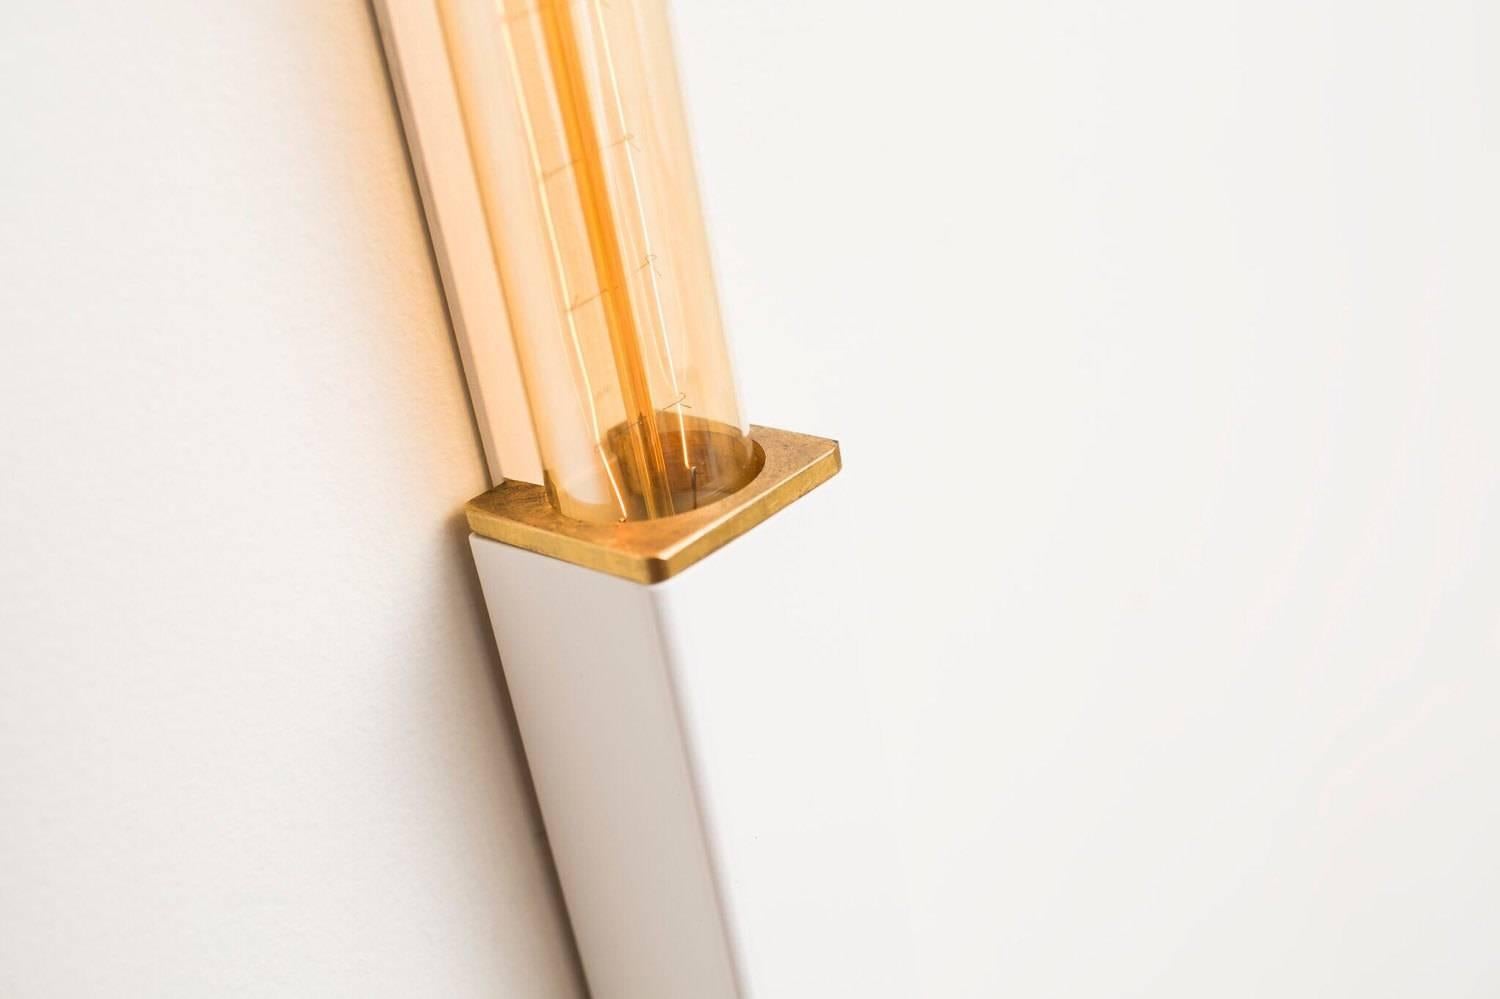 Lacquered Stilk Wall Light Sconce with Brass Details Modern and Minimal Wall Sconce Light